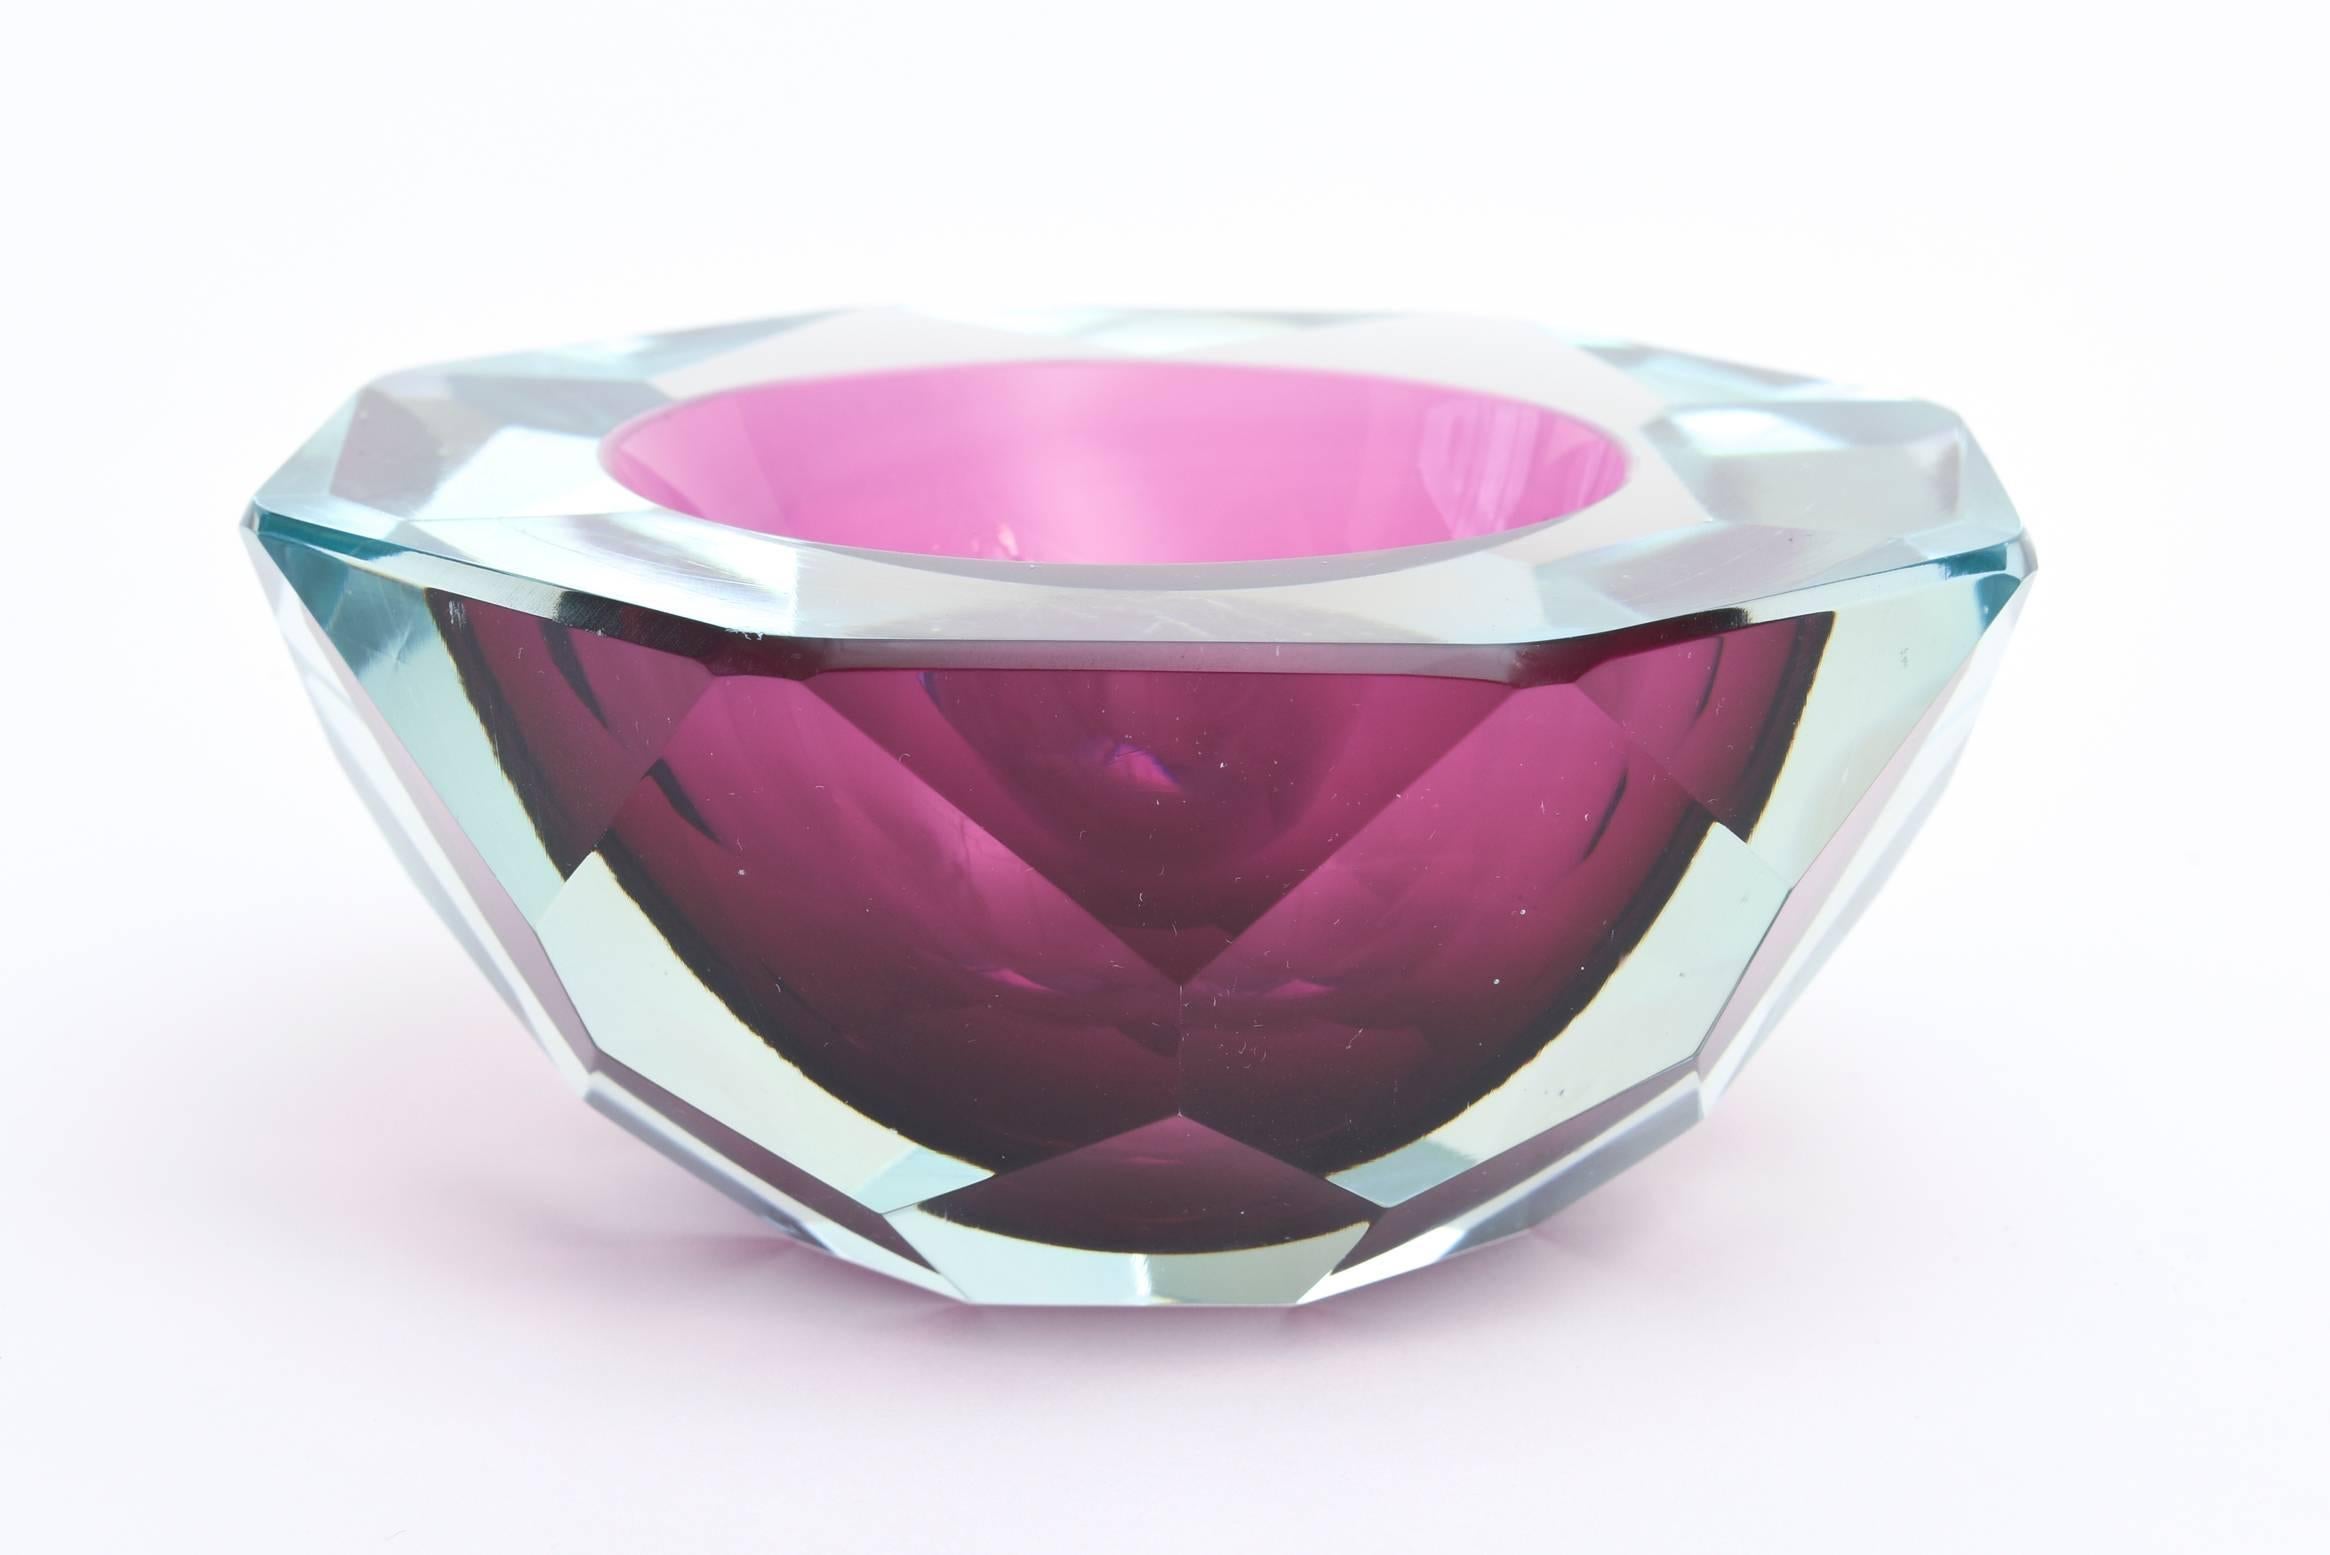 This stunning and glistening Italian Murano diamond faceted glass geode Sommerso bowl has the luscious colors of purple/magenta in the center going to a green turquoise Sommerso. It has diamond faceted flat cut polished sides and top.
These were